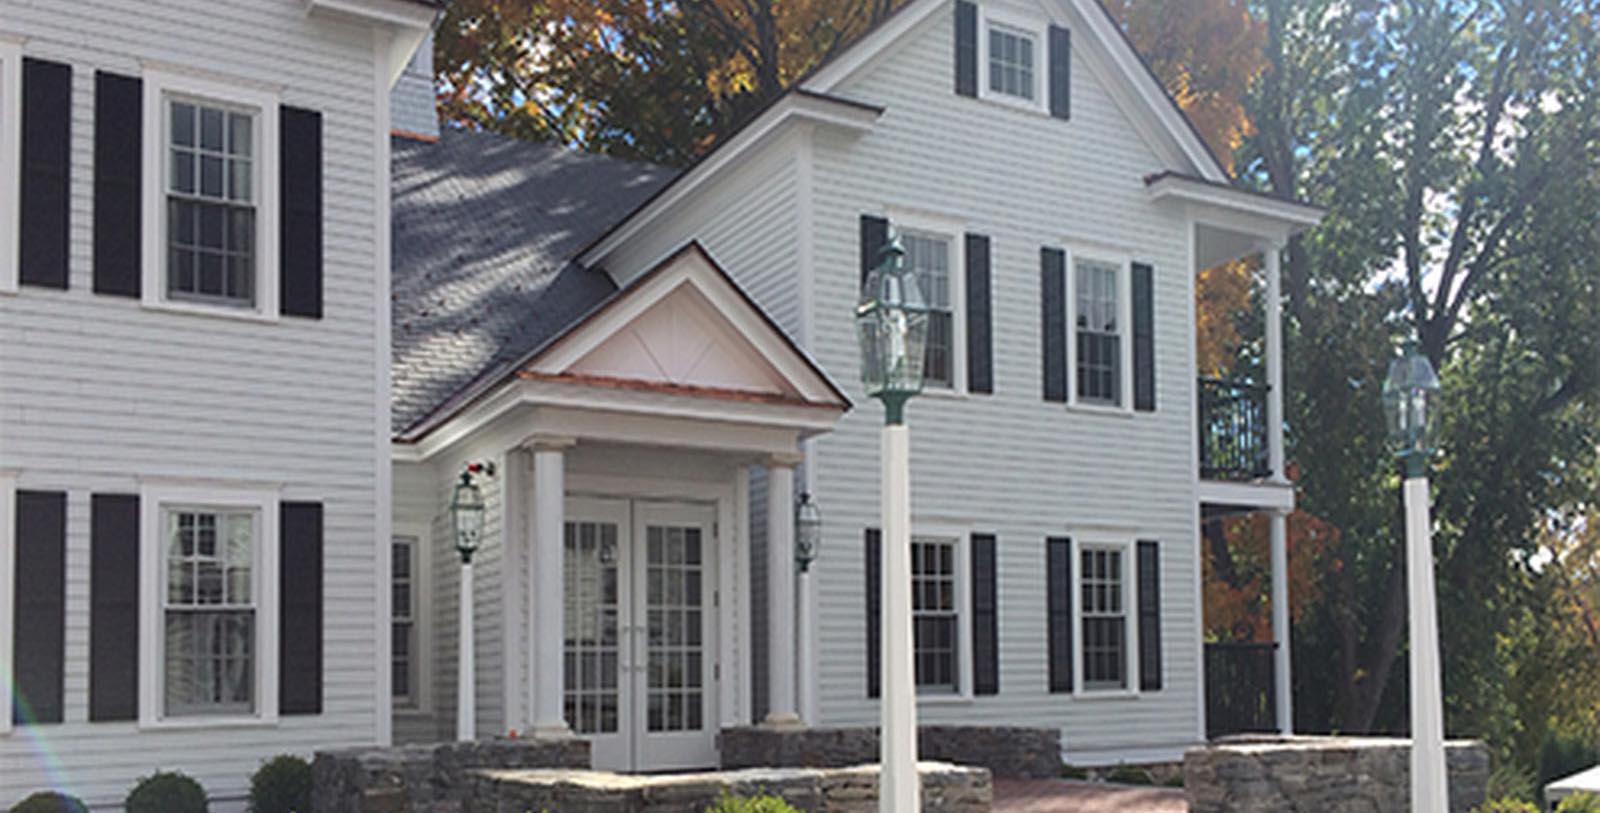 Discover the 18th-century home of the Publick House Historic Inn, built on land won when Colonel Ebenezer Crafts defeated his opponent in a game of “winner takes all.”